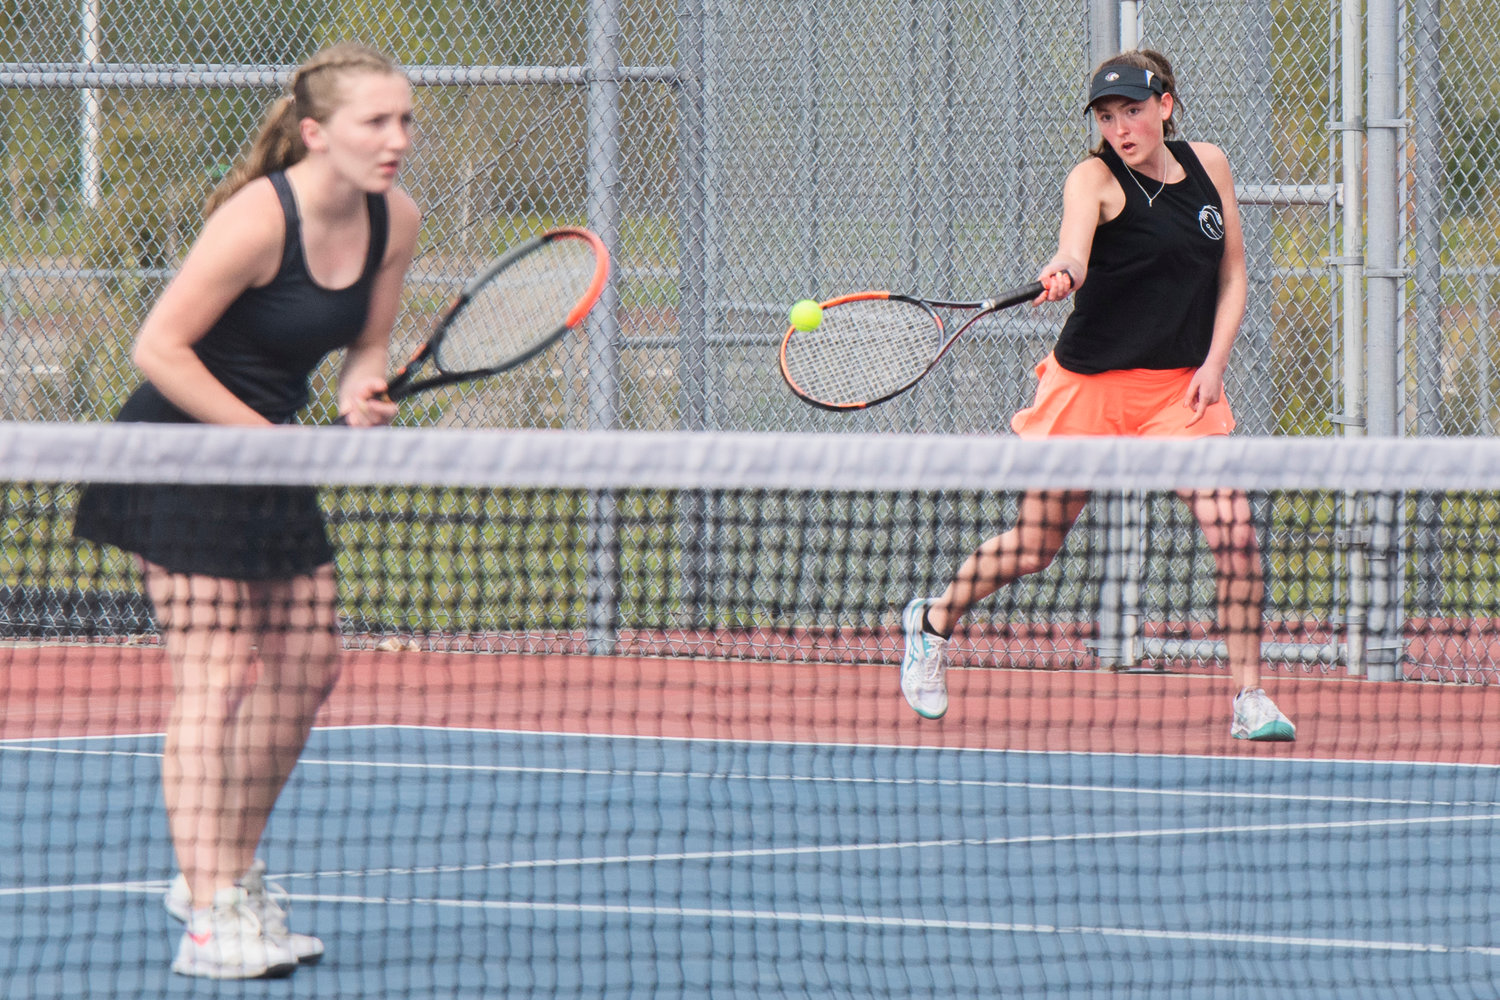 Maya O’Dell, second doubles player for Centralia, looks to return a shot alongside her partner Sophia Stehr during a doubles match at A.G. West Black Hills High School Tuesday afternoon in Tumwater.